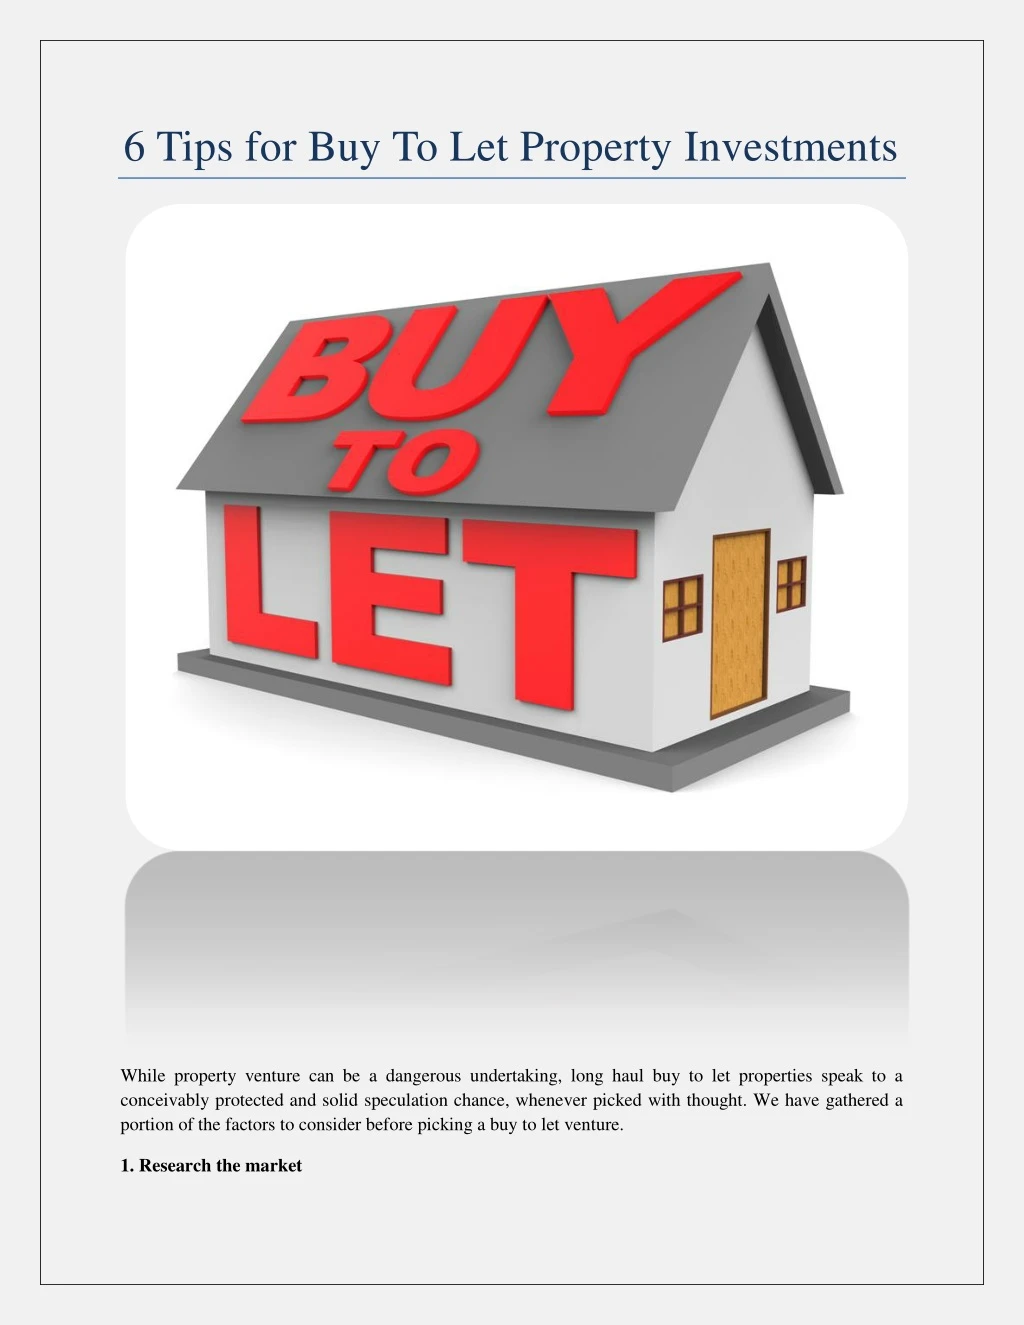 6 tips for buy to let property investments